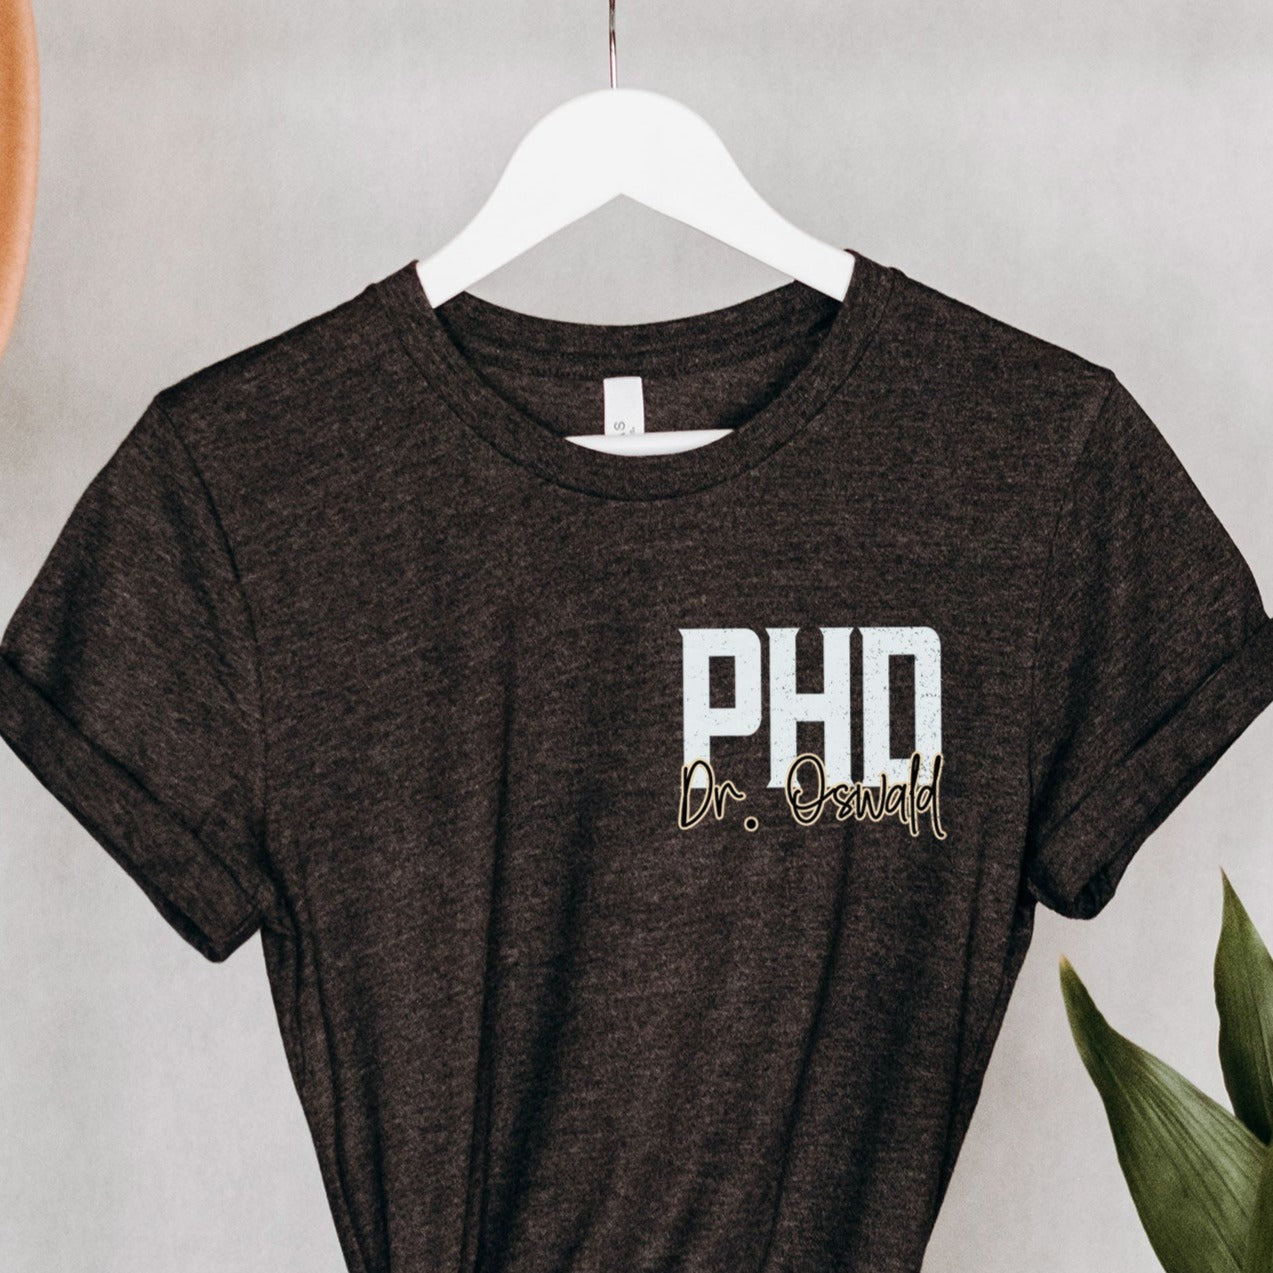 Custom Name PHD Shirt Personalized Doctor of Philosophy Grad Gift Pocket Design Tee Not That Kind Of Doctor Tee Student Graduation Sweater